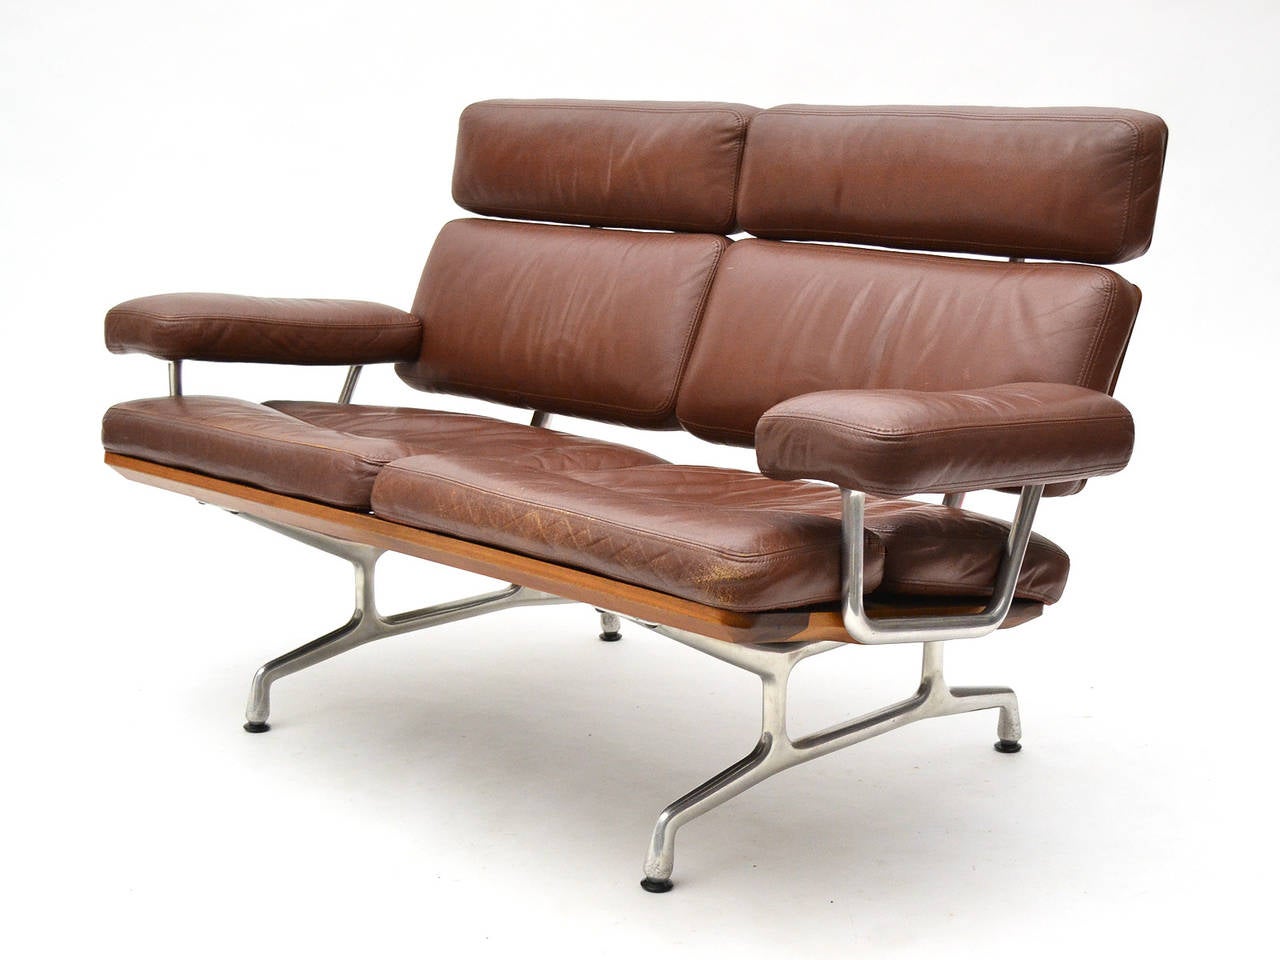 American Eames Teak and Leather Sofa by Herman Miller